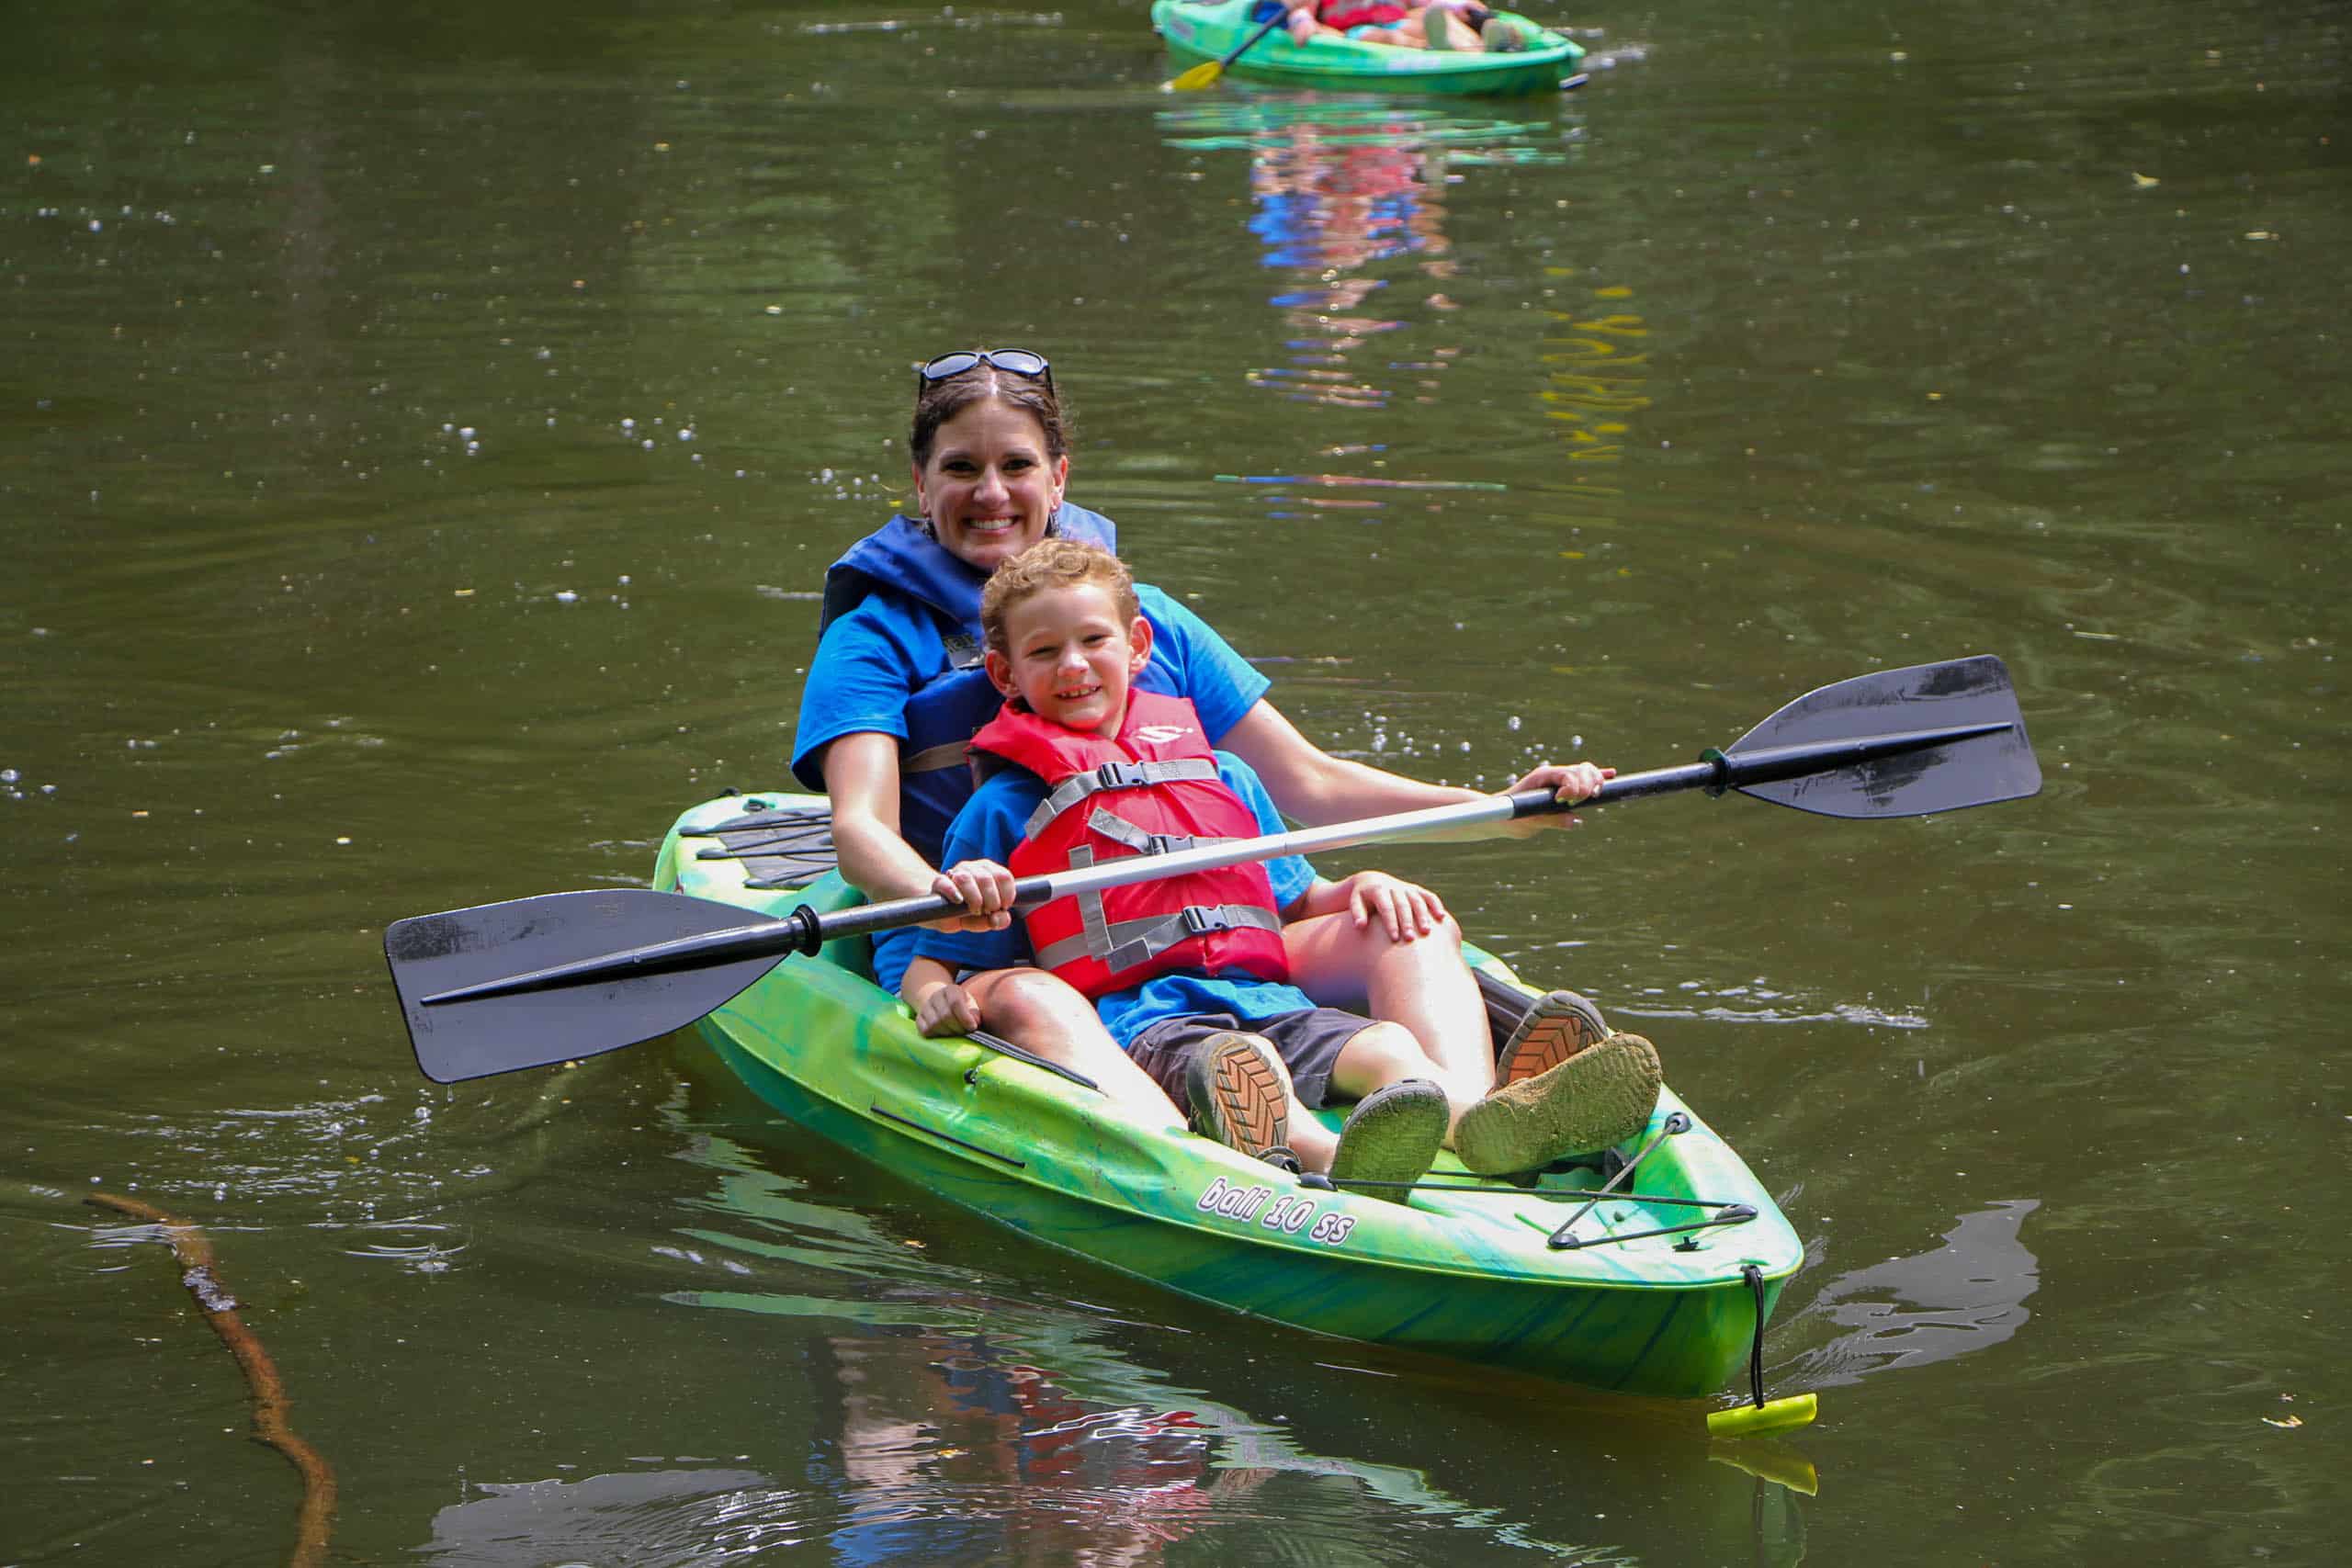 A kid and his mom paddle a green canoe at summer camp in Iowa.